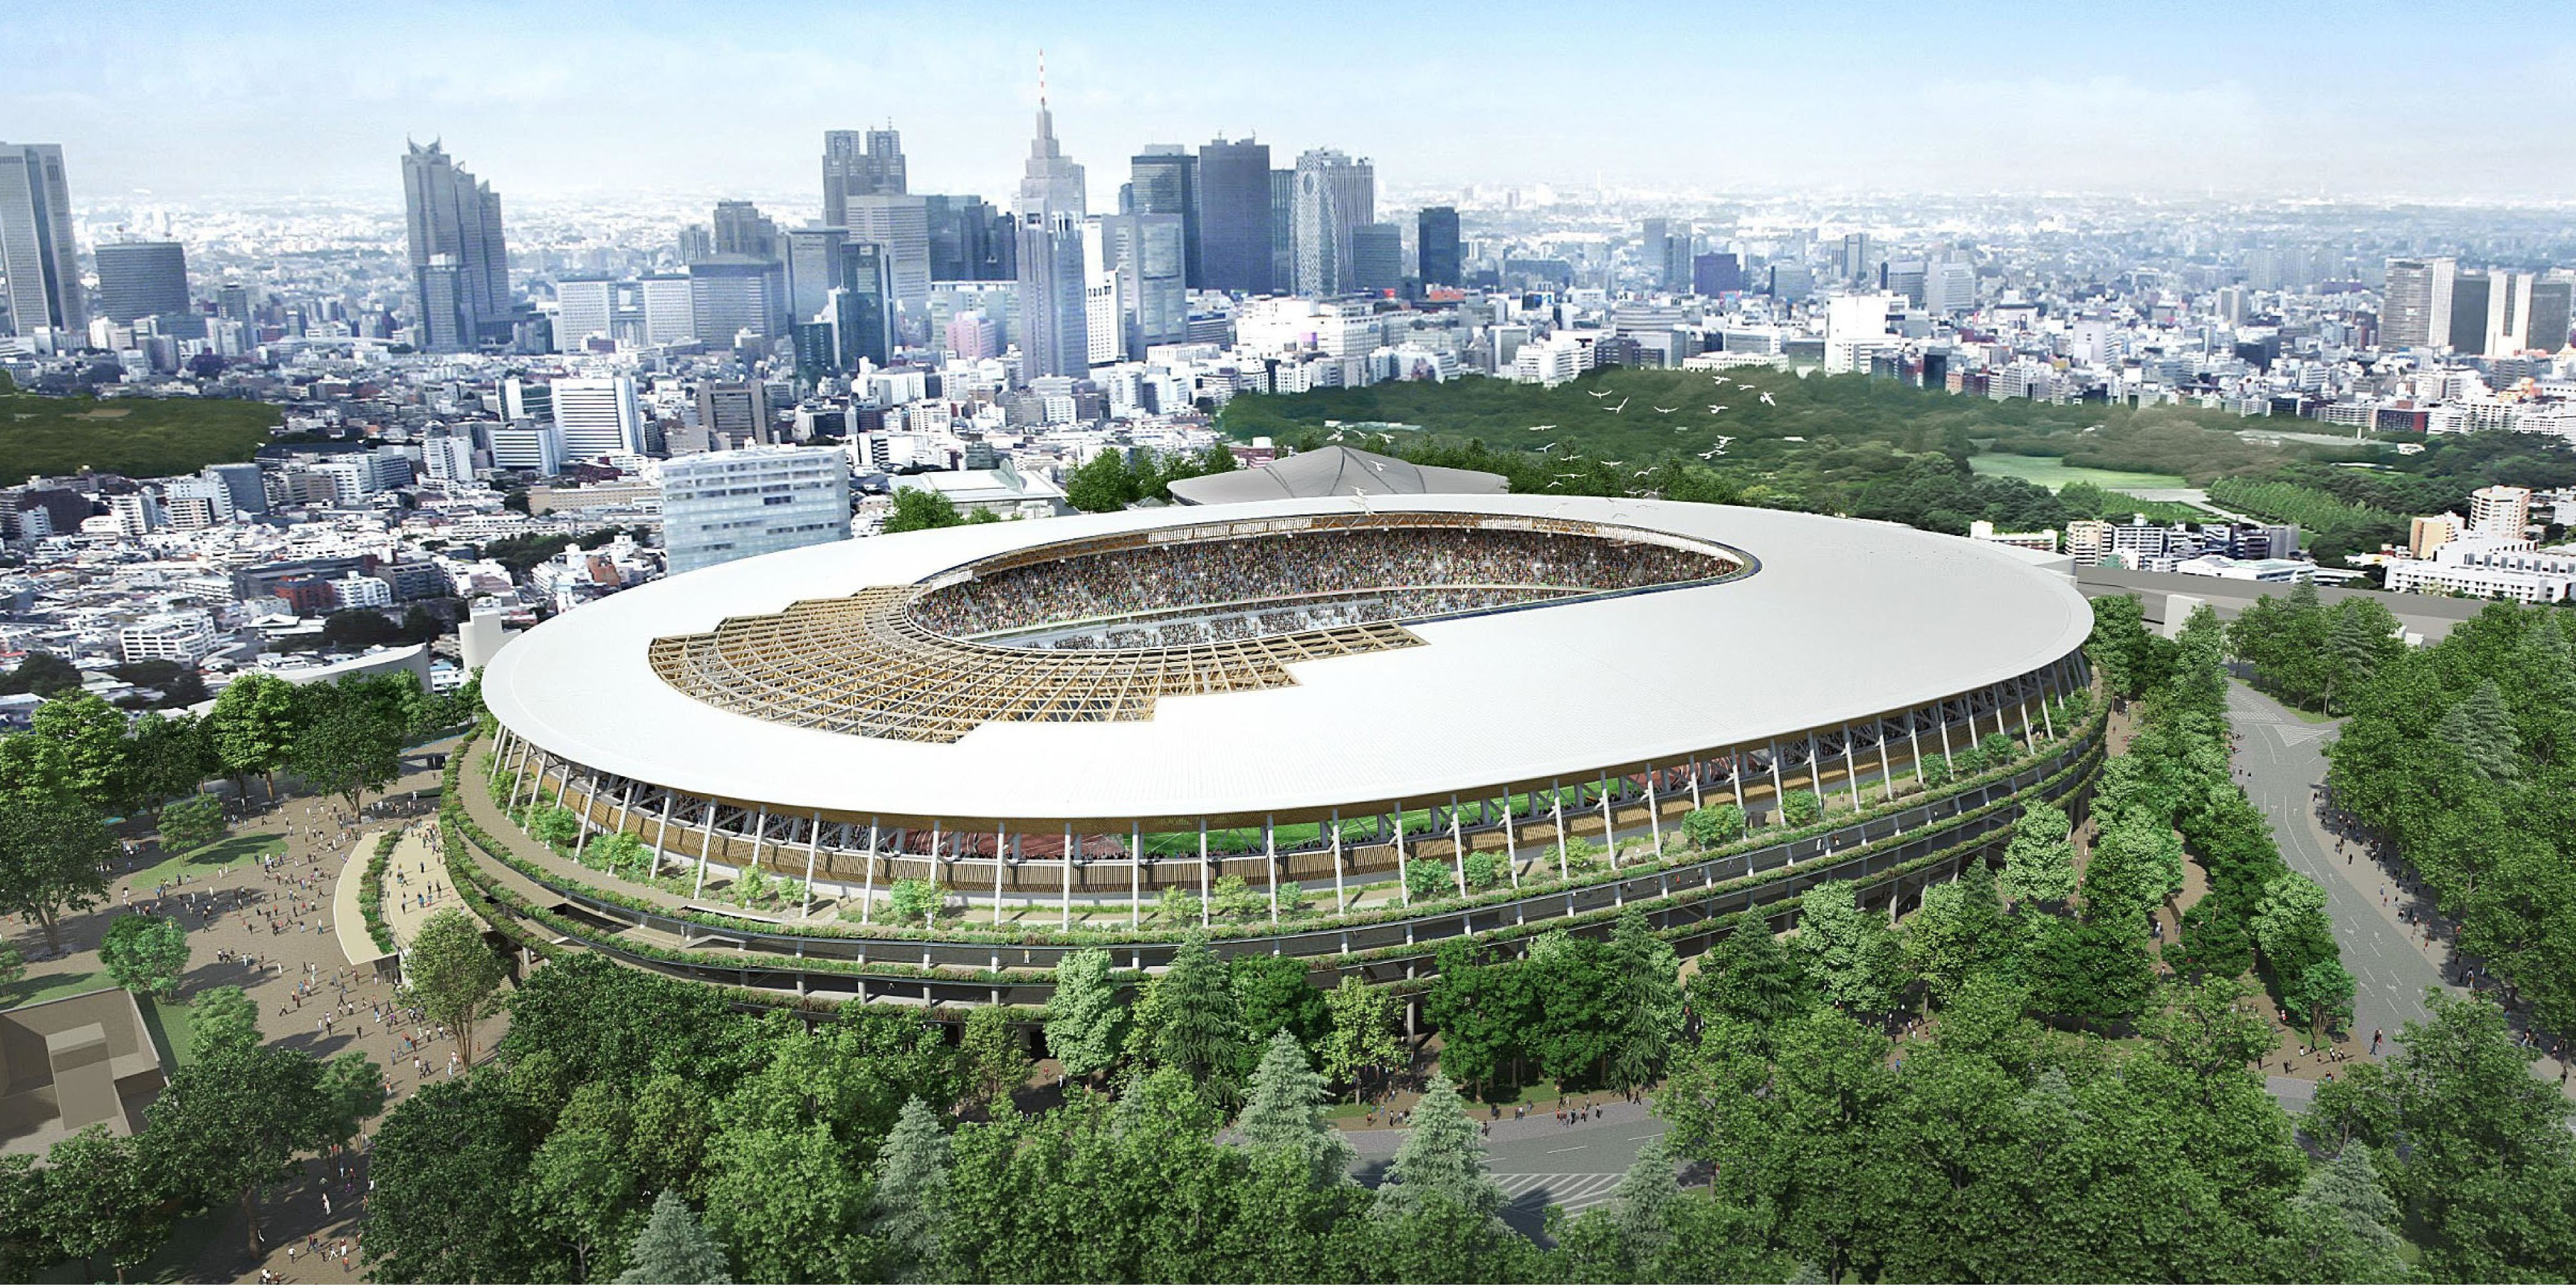 The cauldron location at the new National Stadium, seen in this artist's projection, is under review amid fears the wooden interiors could breach fire laws. | KYODO